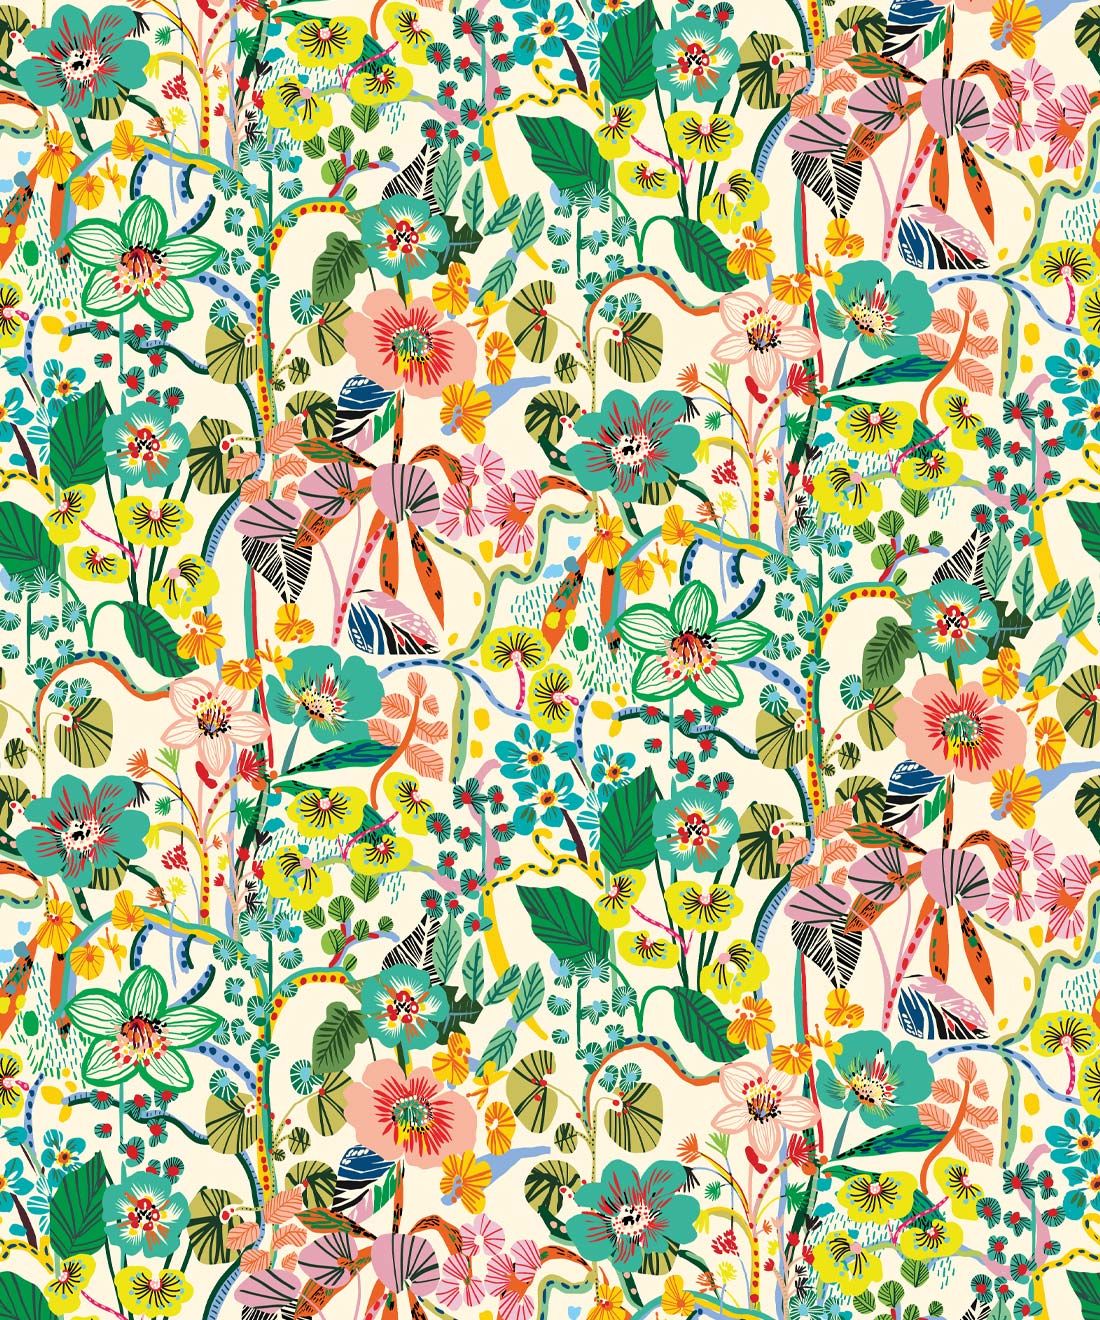 Jardin Aux Mille Fleurs • Colorful Bold Floral French Garden Wallpaper • Kitty McCall • Swatch